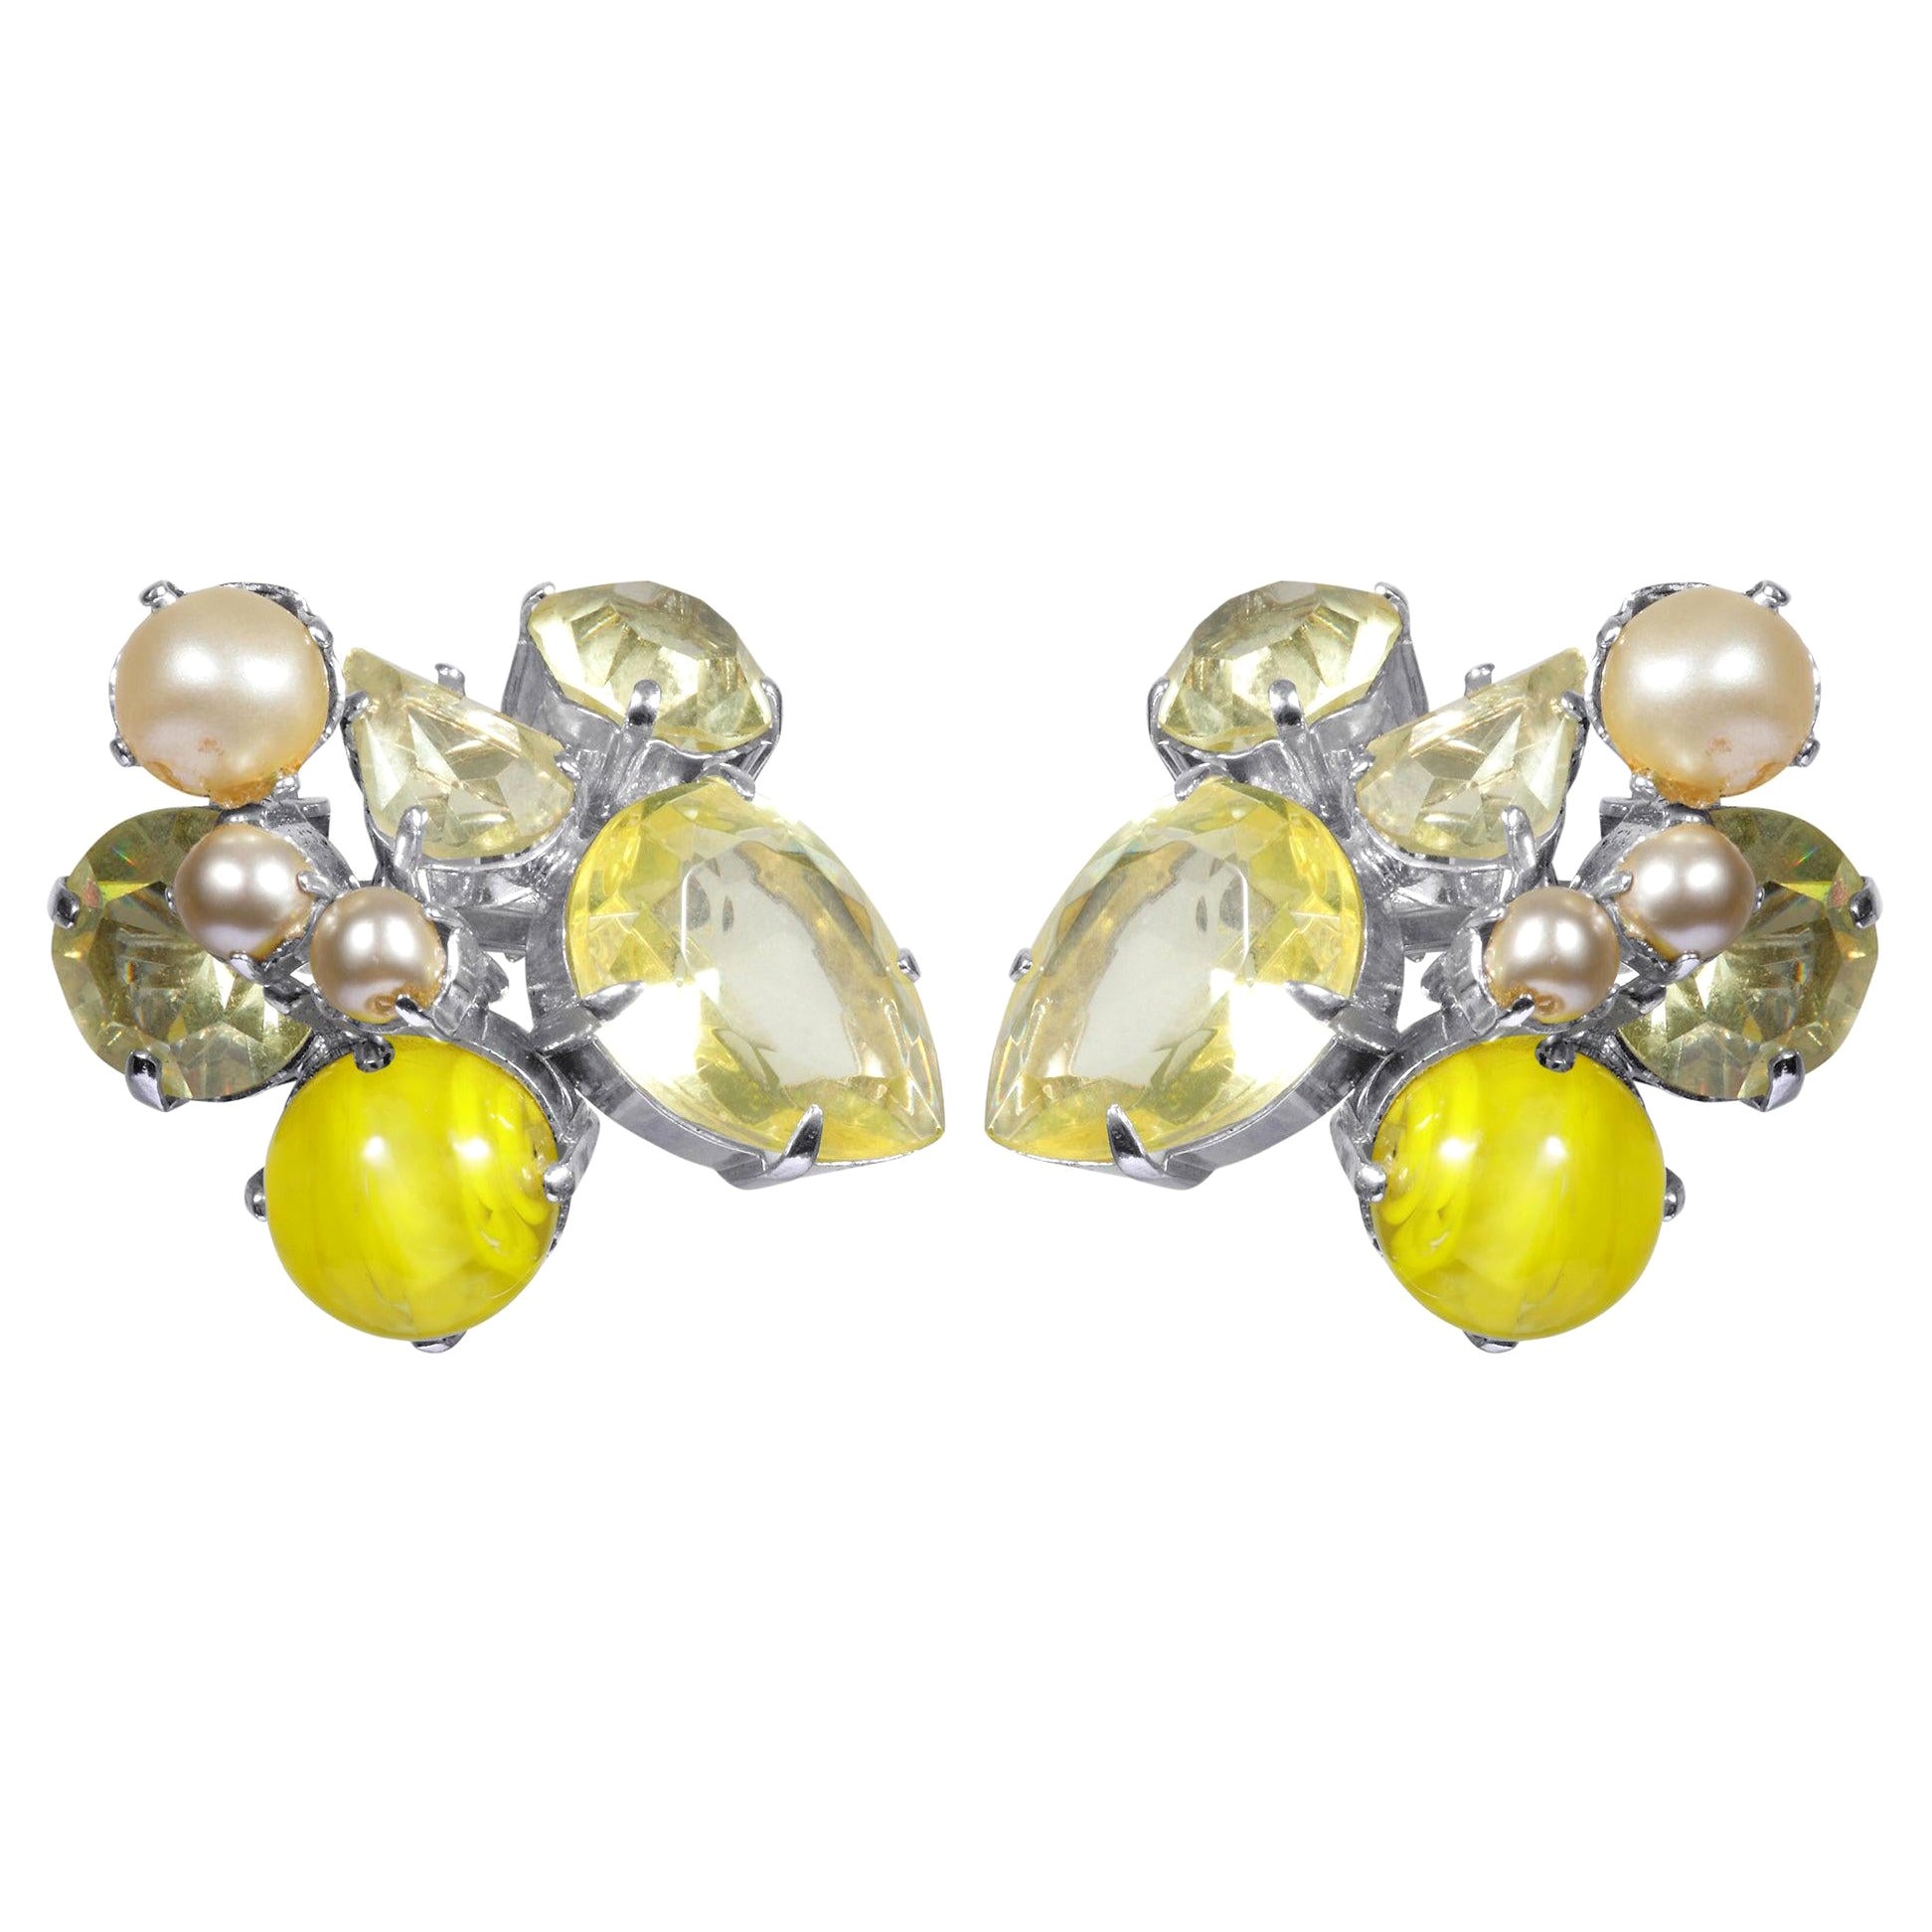 1961 Christian Dior Yellow and Pearlescent Cluster Earrings For Sale